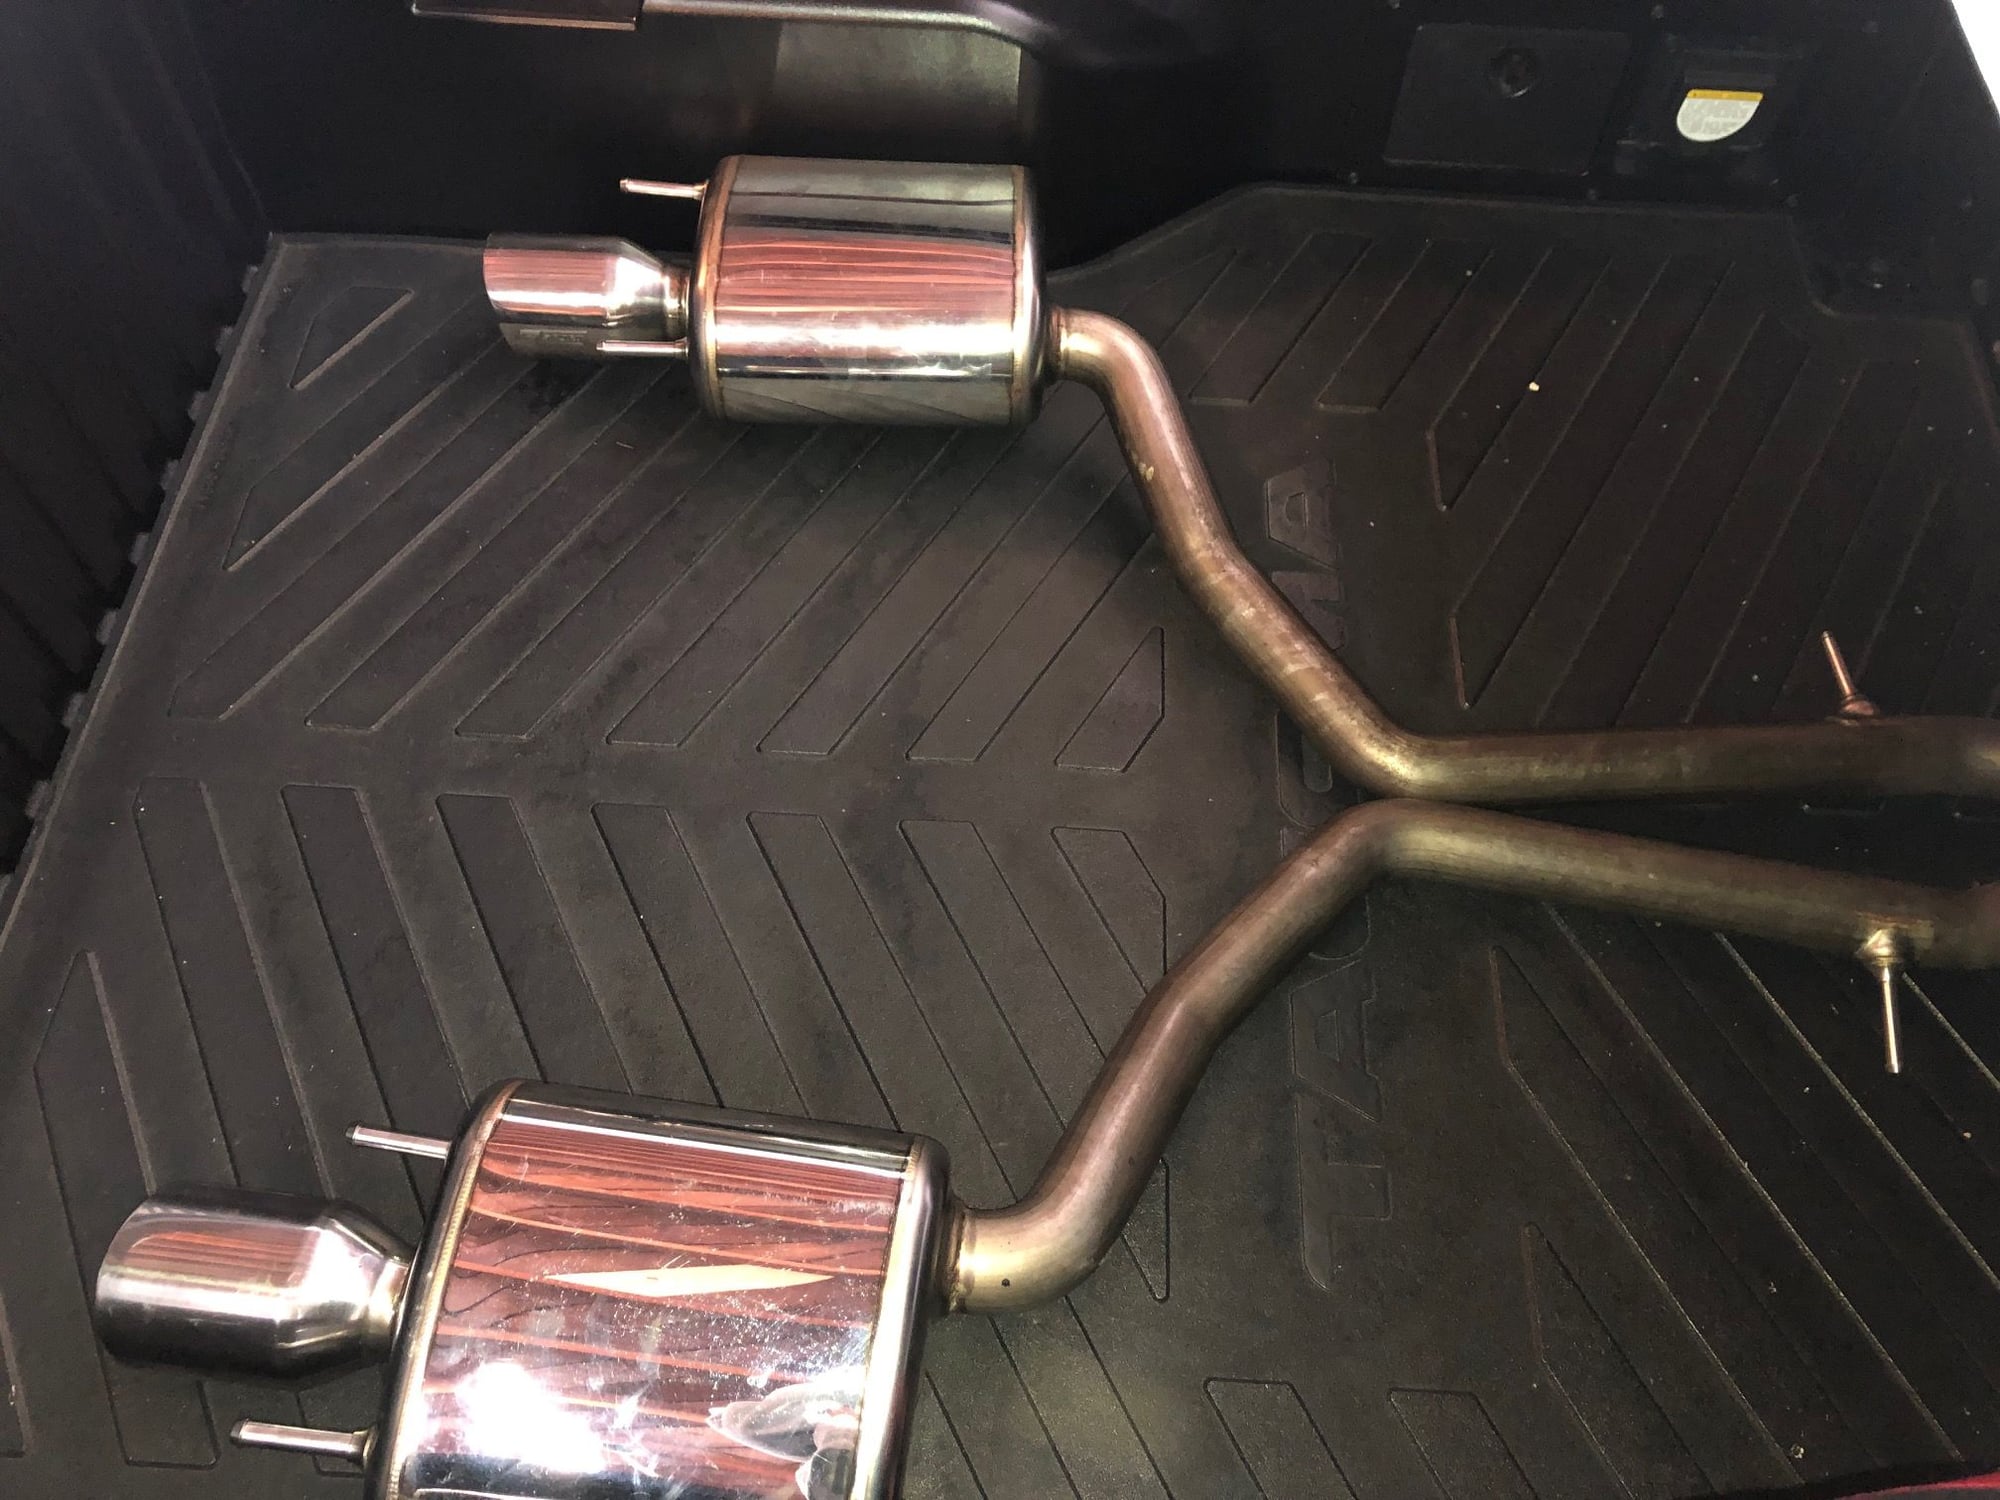 Engine - Exhaust - Lexus 3IS RC F-Sport Axle Back Exhaust - Used - 2014 to 2019 Lexus All Models - 2014 to 2019 Lexus IS200t - 2014 to 2019 Lexus IS300 - 2014 to 2019 Lexus IS350 - 2014 to 2019 Lexus RC Turbo - 2014 to 2019 Lexus RC200t - 2014 to 2019 Lexus RC300 - 2014 to 2019 Lexus RC350 - Fullerton, CA 92833, United States